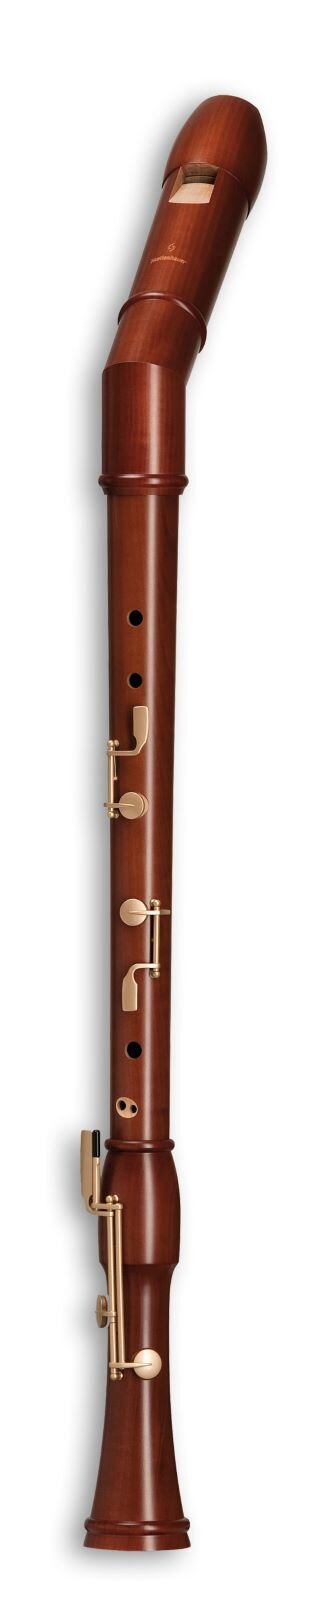 Mollenhauer Canta Bass Angled in F Dark Tinted Baroque Double Hole 4 Keys + Case (2546KD) : photo 1